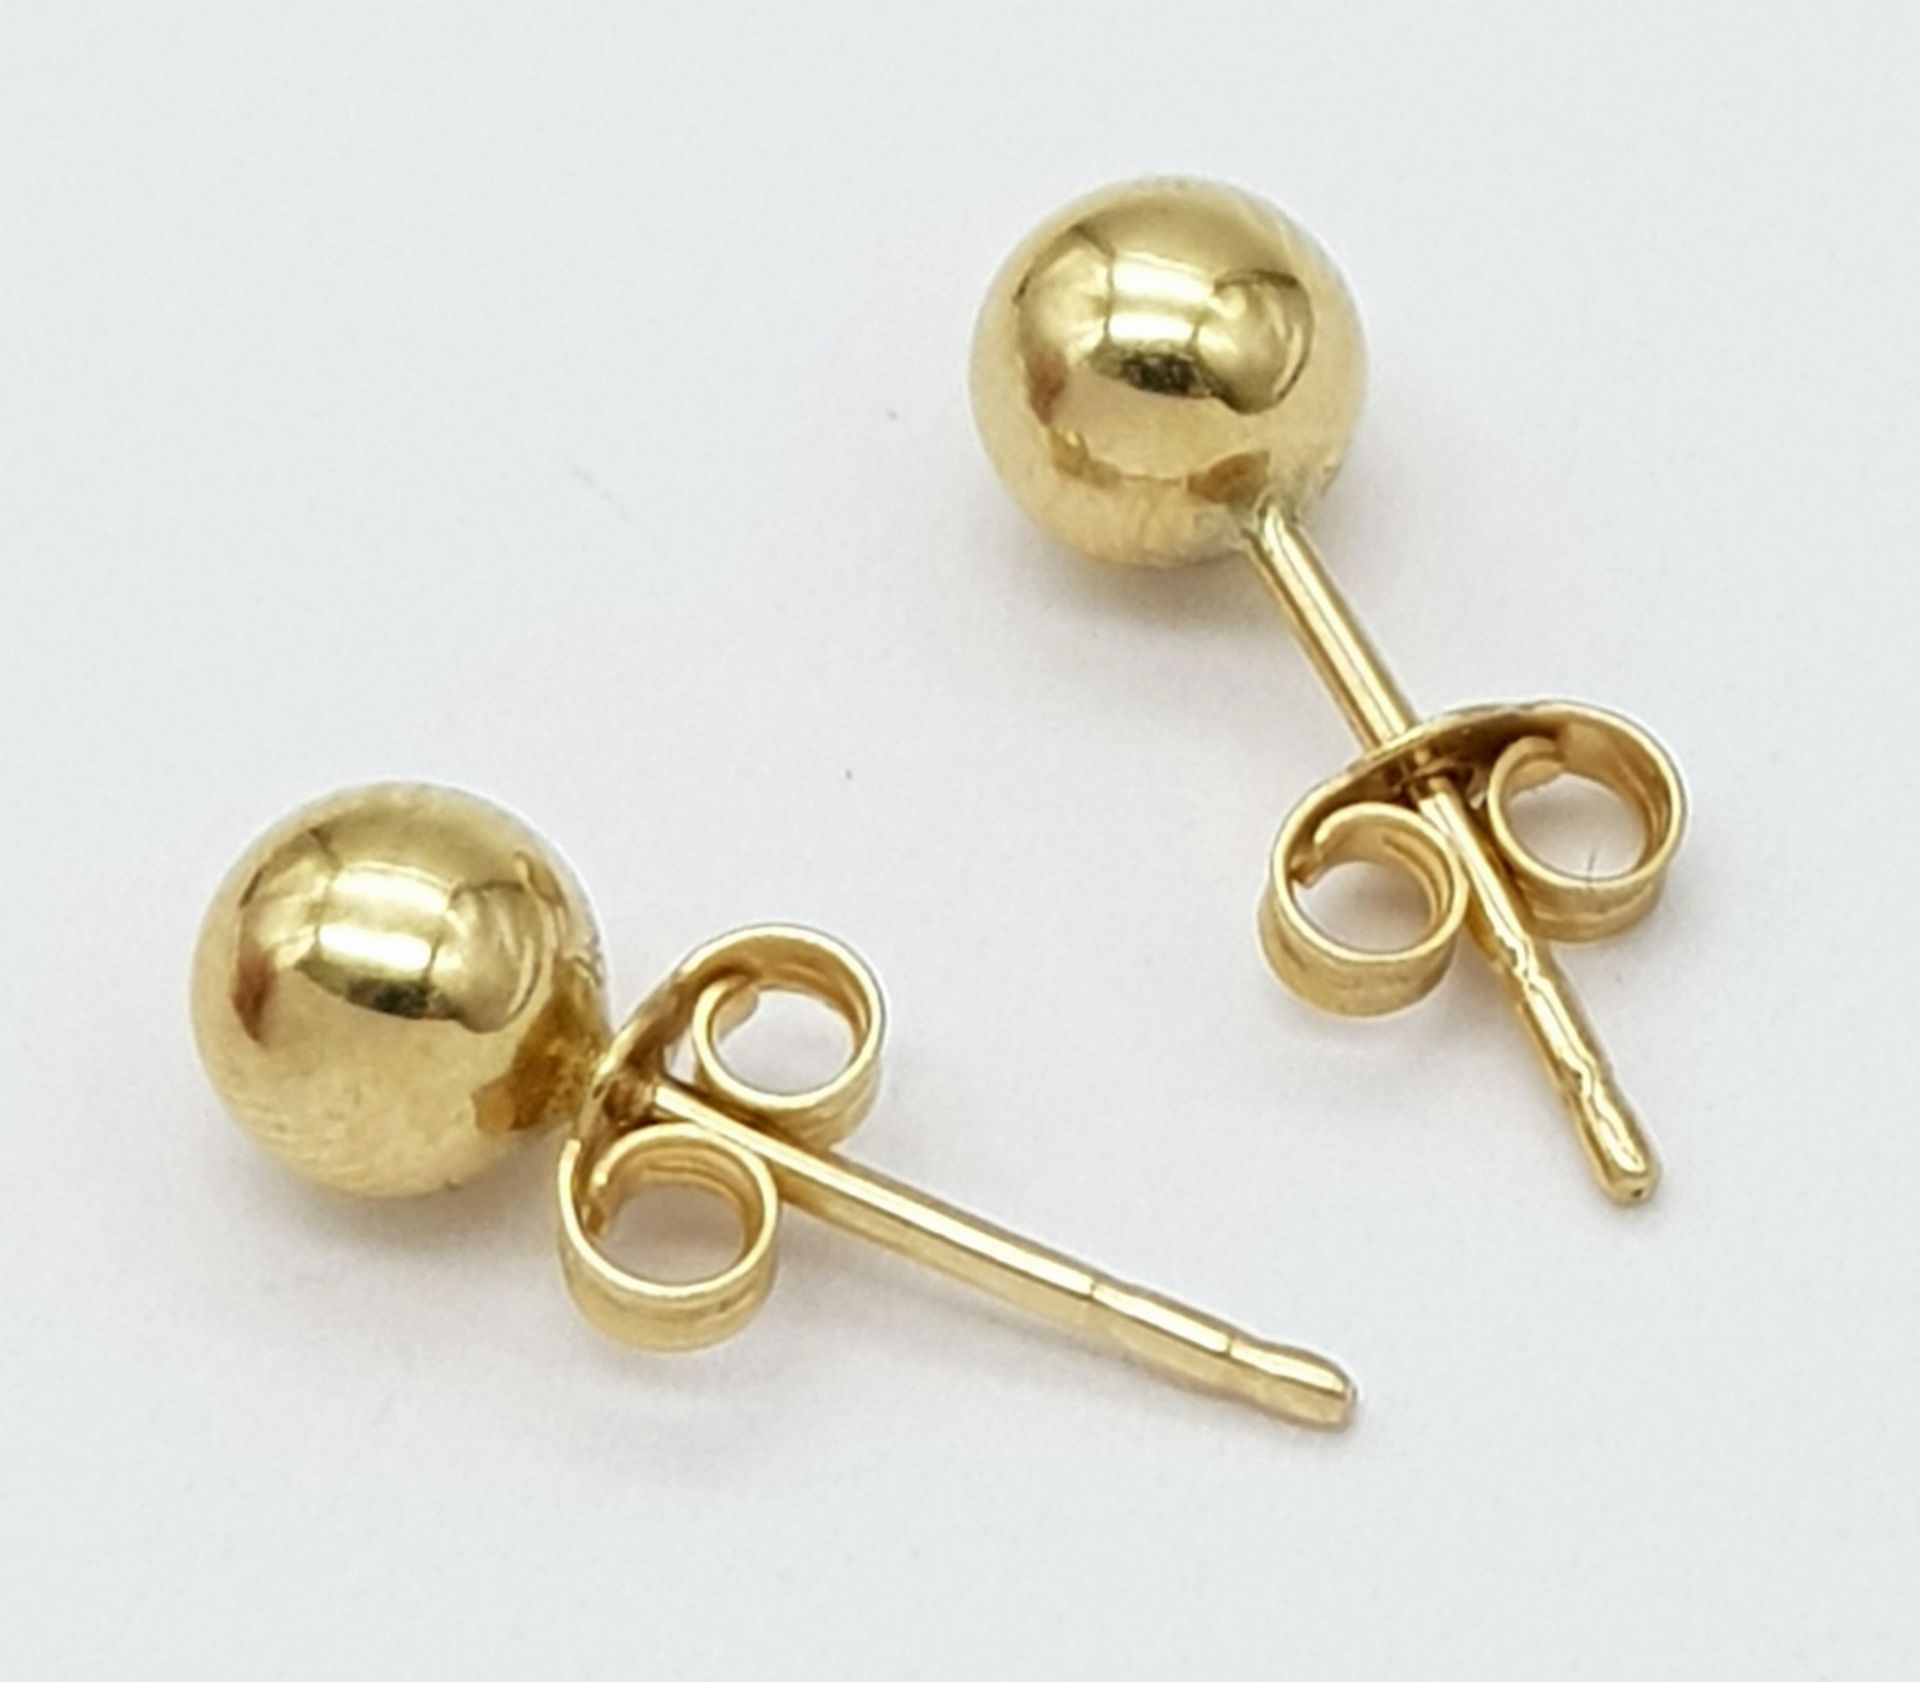 A PAIR OF 9K YELLOW GOLD BALL STUD EARRINGS. 5mm diameter, 0.4g weight. Ref: SC 8021 - Image 2 of 3